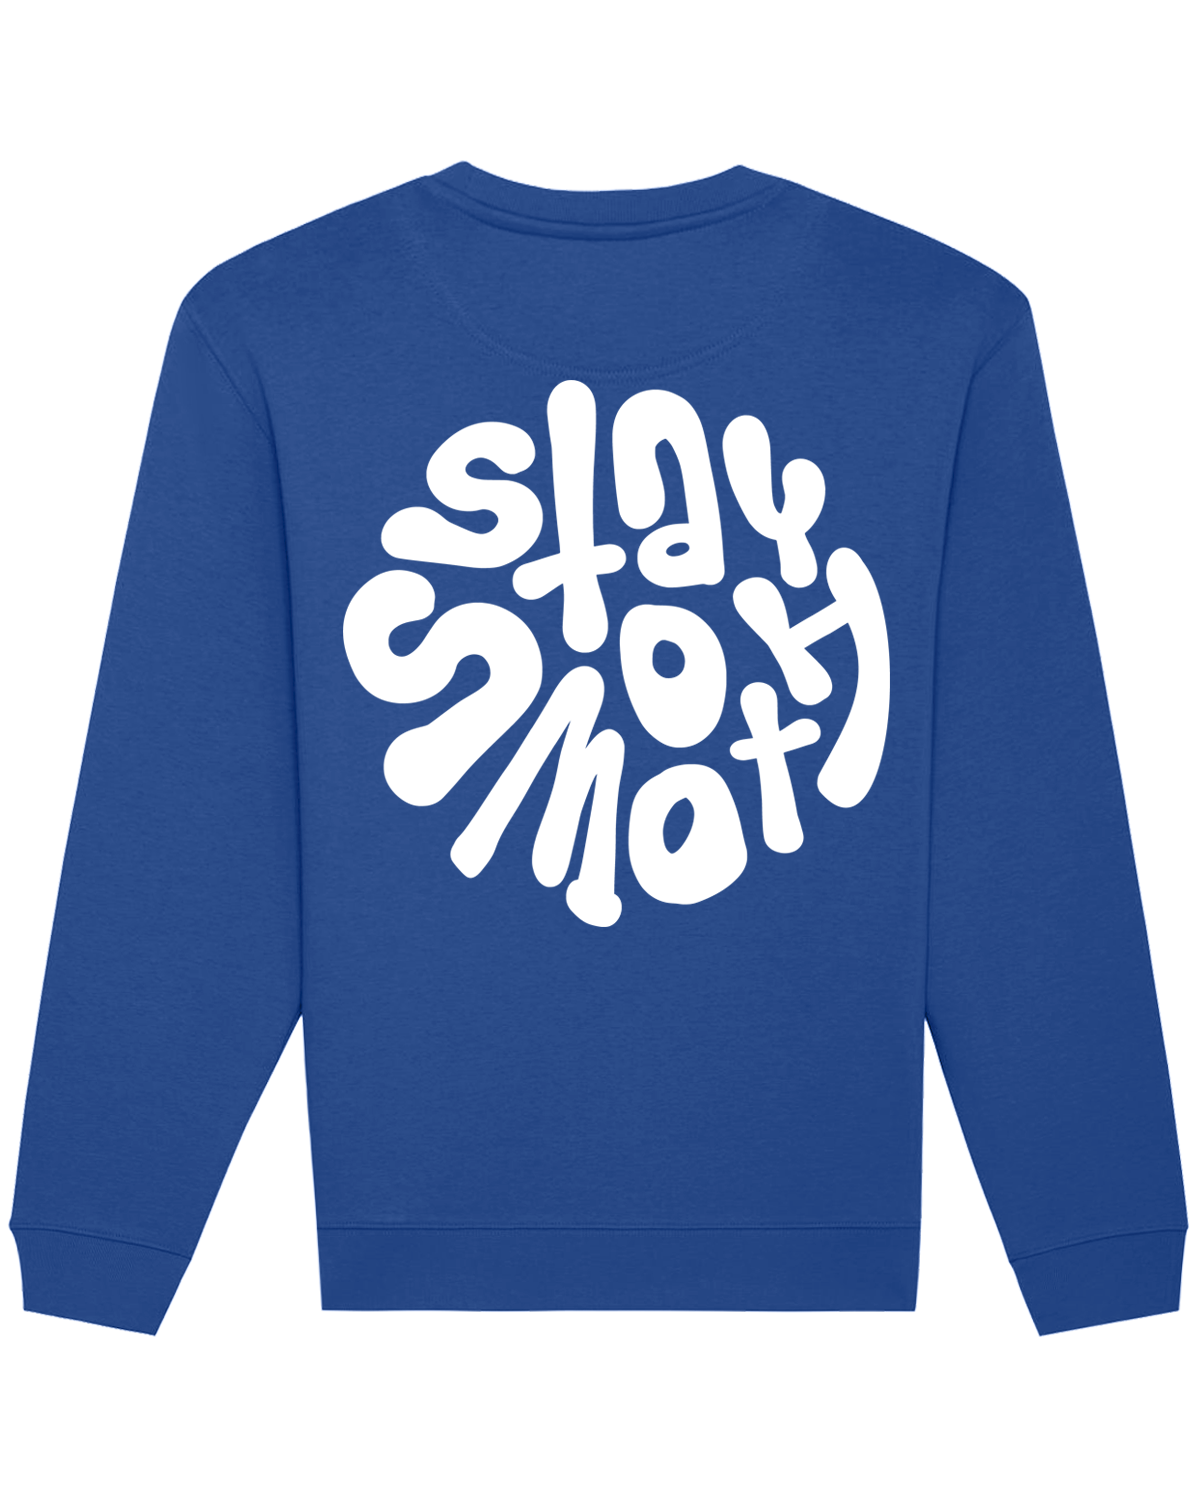 Blue Kids Crew / Stay Smooth White Front+Back Boys